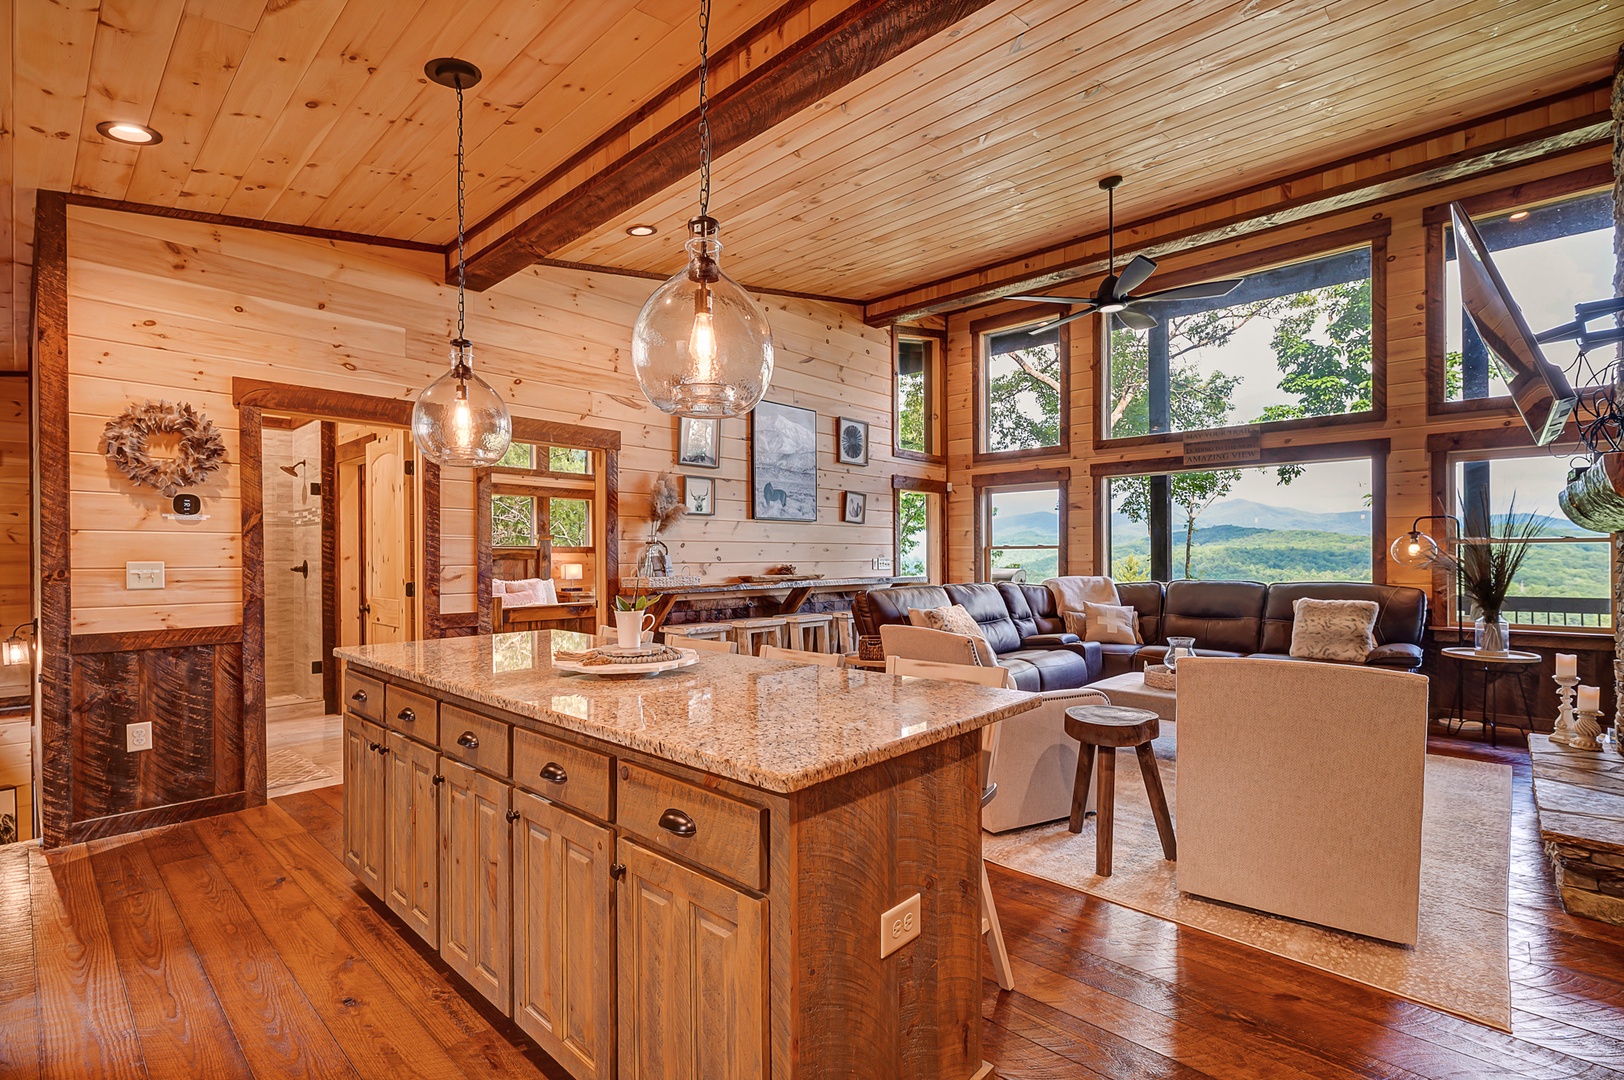 Feather & Fawn Lodge- Kitchen island overlooking the living room and views